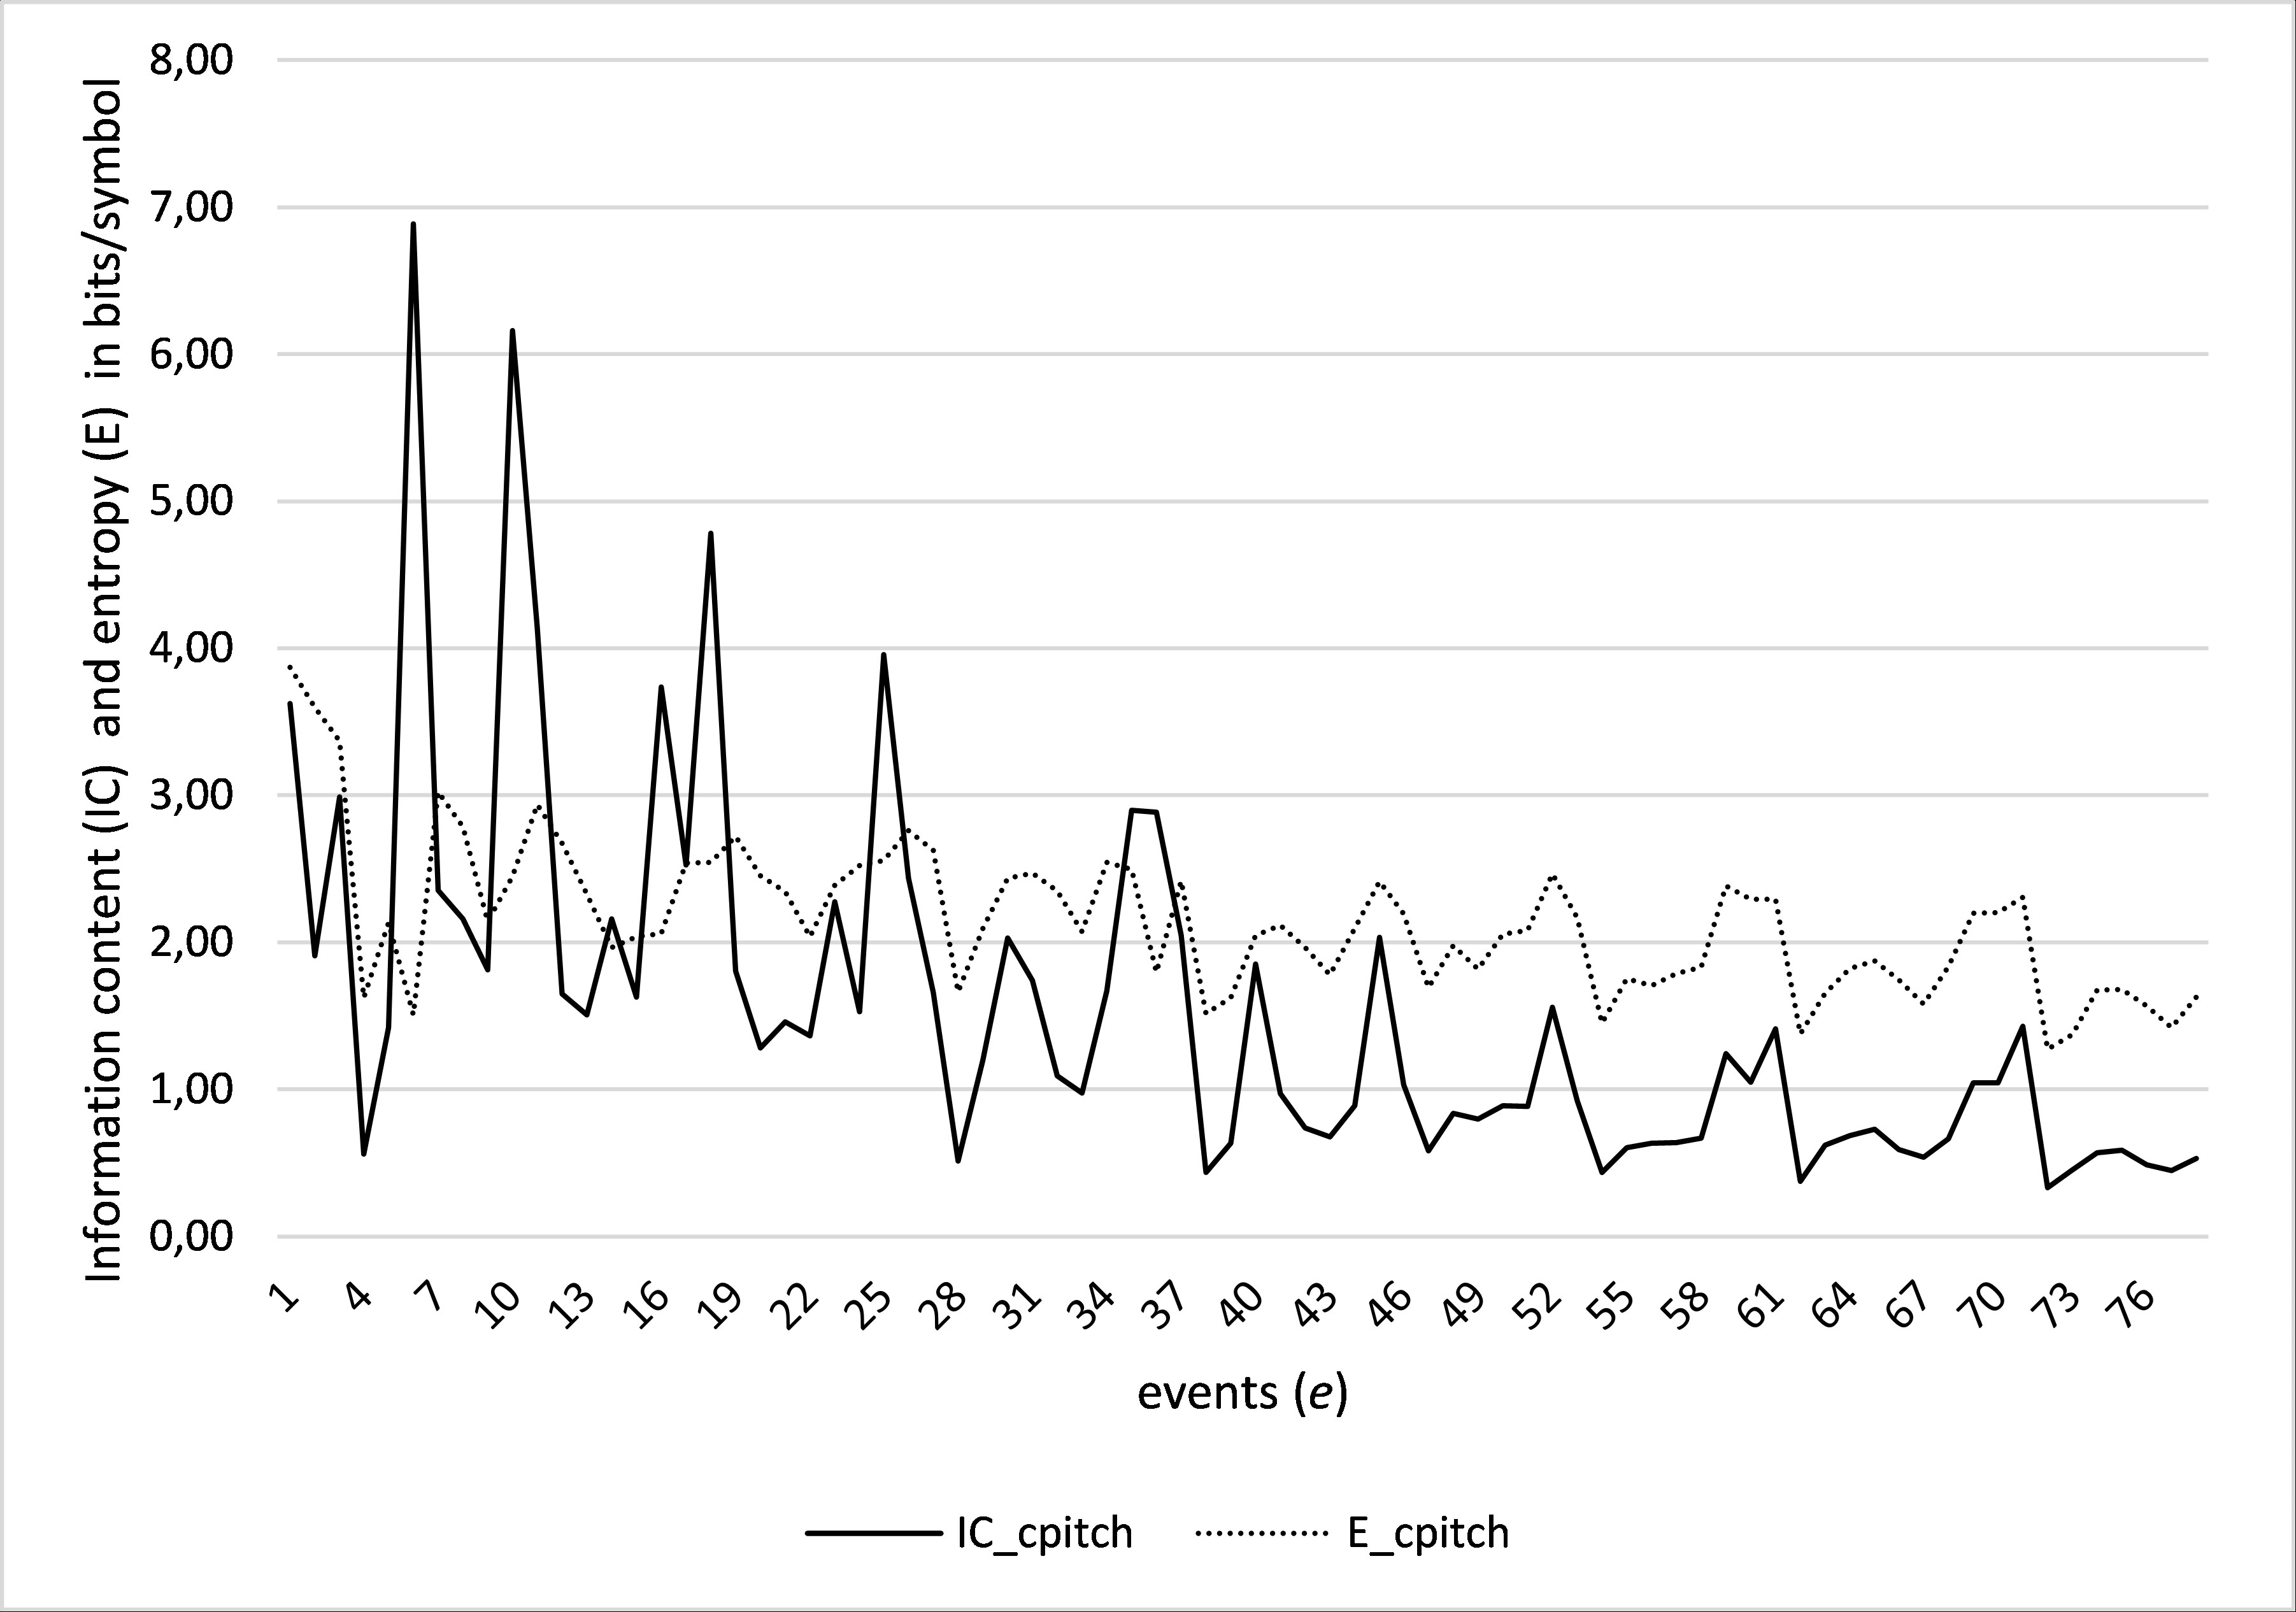 A line graph with two lines. The y-axis is labelled 'Information content (IC) and entropy (E) in bits/symbol' and goes from 0,00 to 8,00 and the x-axis is labelled events (e). The first line represents IC_cpitch and the second line represents E_cpitch. The IC_cpitch line tends to span a more expansive part of the graph, having higher highs and lower lows than the E_cpitch line. More description below.